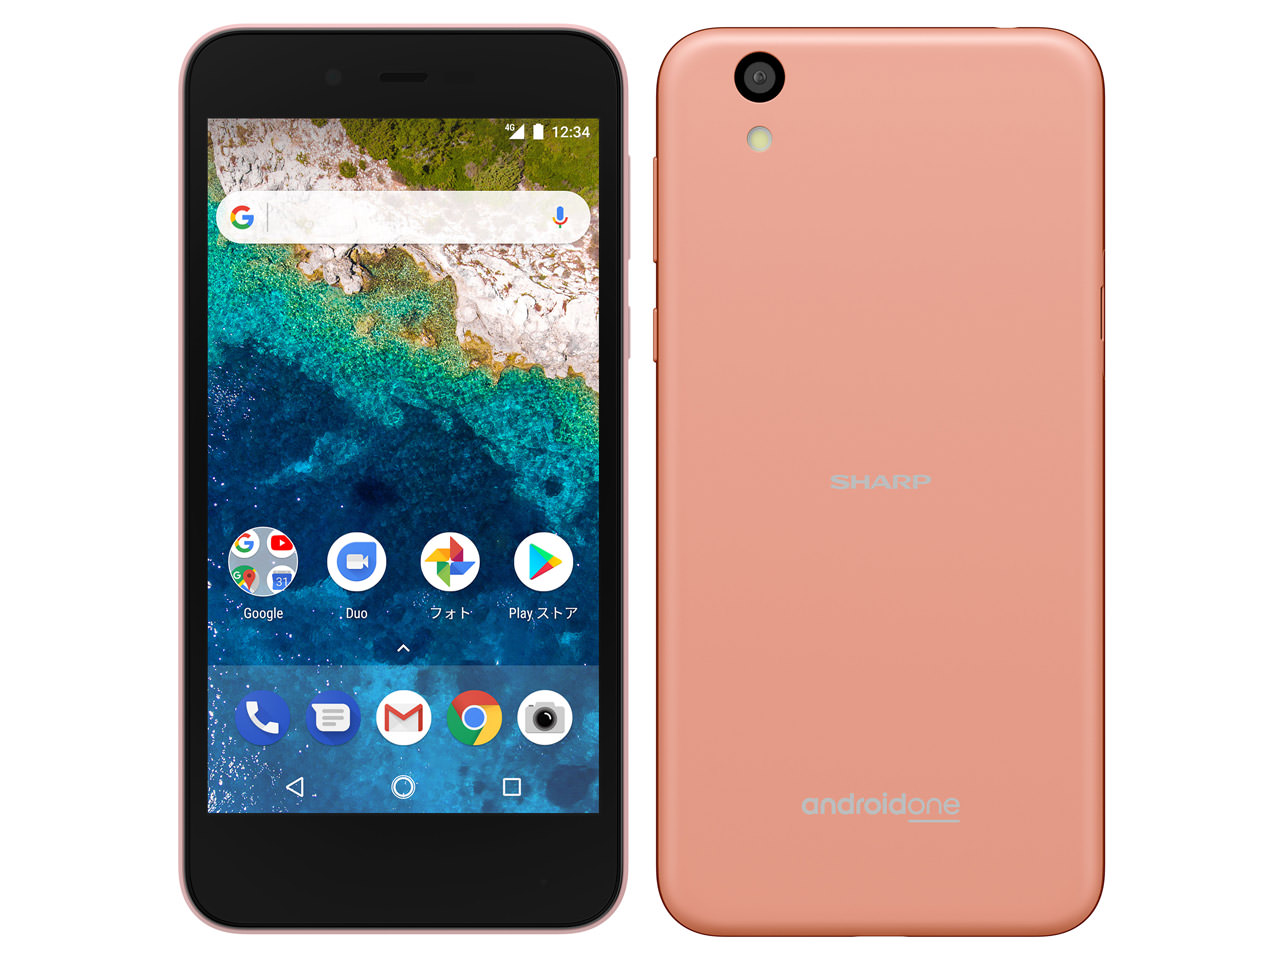 Android One S3 ワイモバイル [ピンク]